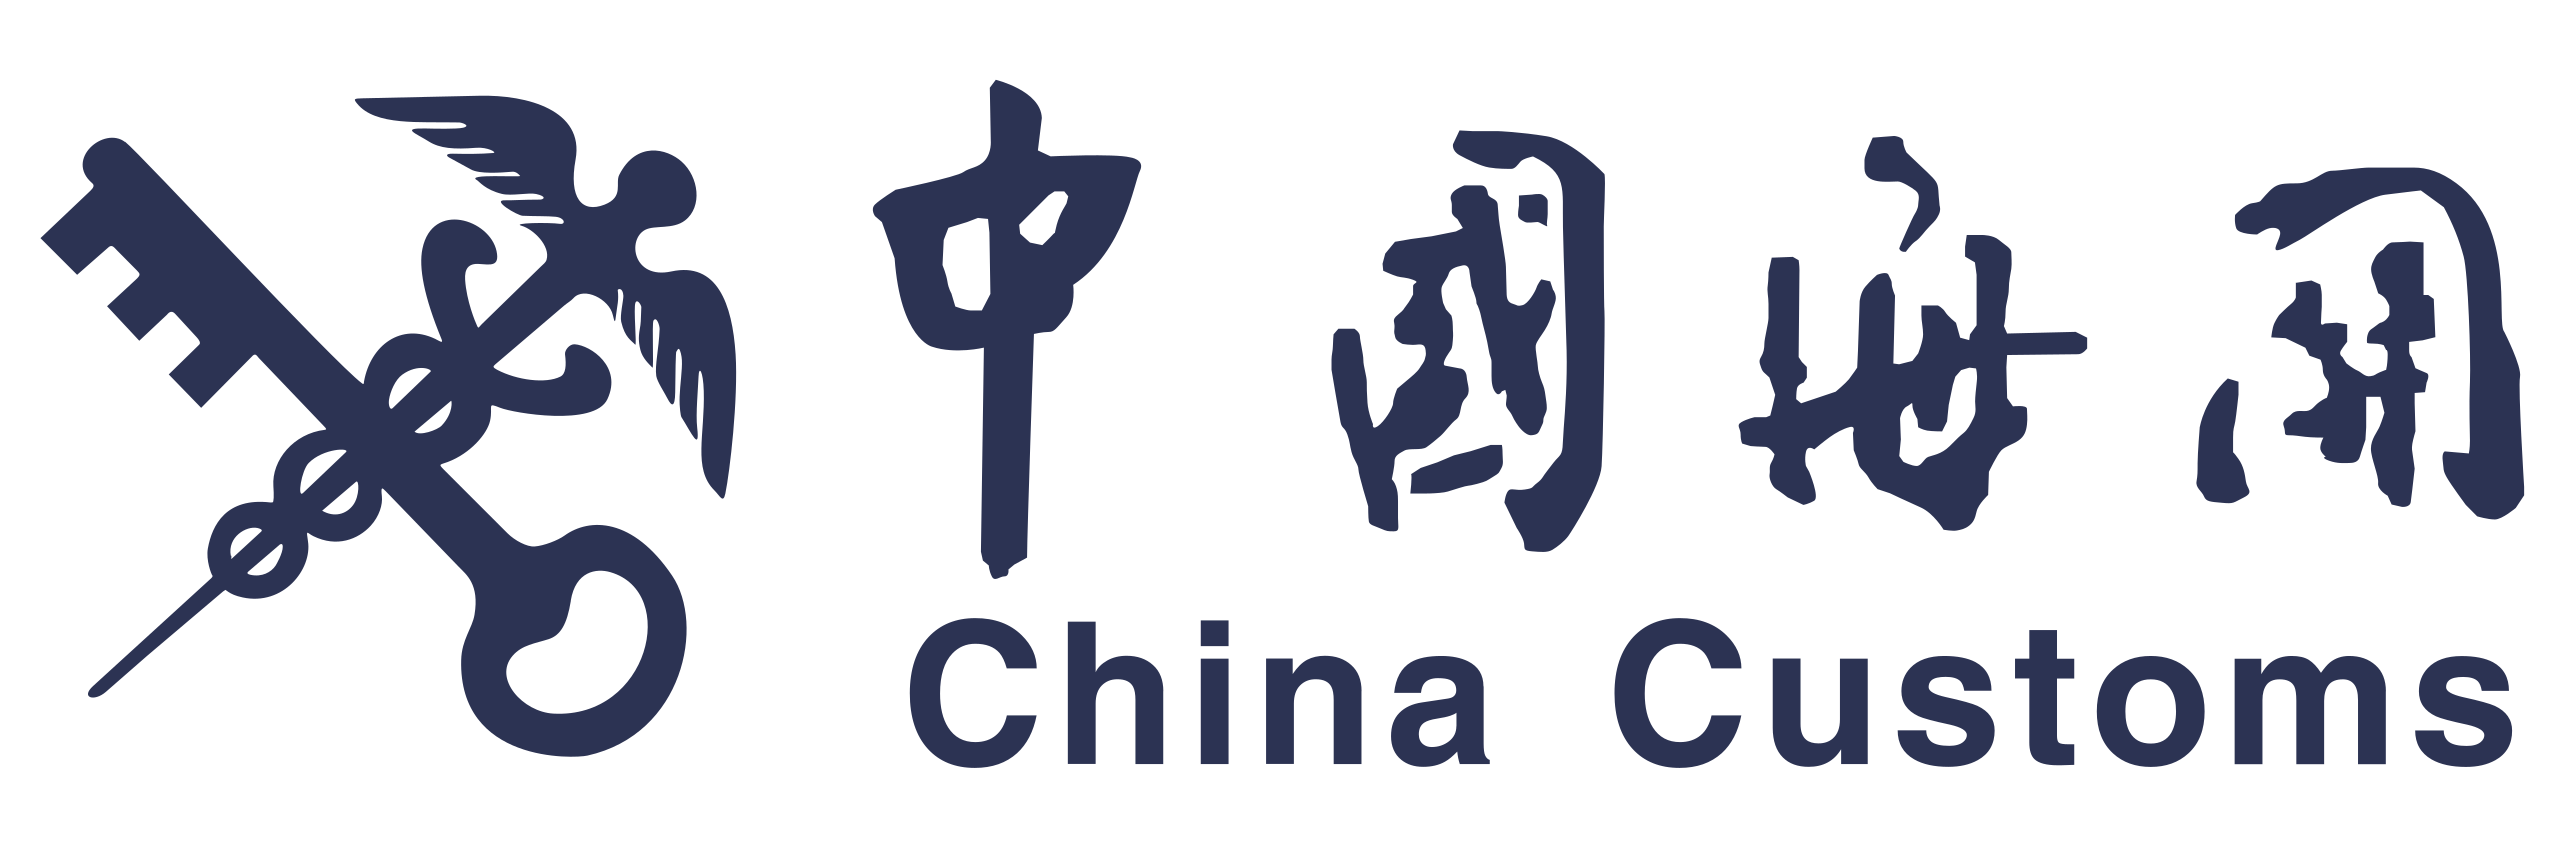 2560px-General_Administration_of_Customs_of_the_People's_Republic_of_China_logo.png